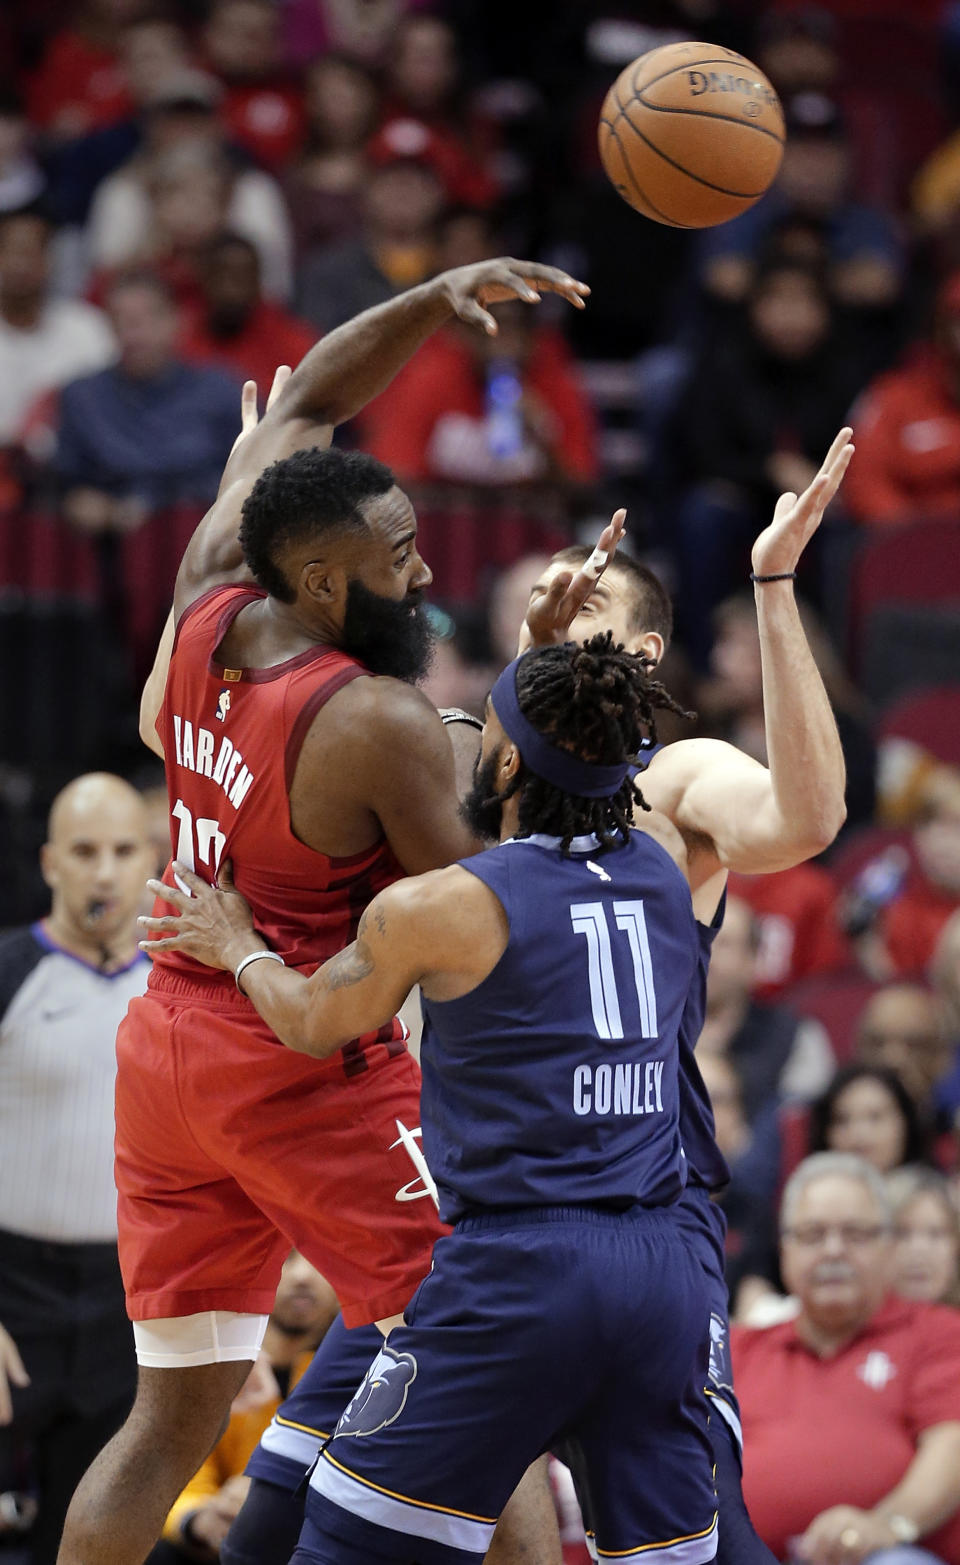 Houston Rockets guard James Harden (13) passes the ball over Memphis Grizzlies guard Mike Conley (11) and center Marc Gasol, back, during the first half of an NBA basketball game Monday, Dec. 31, 2018, in Houston. (AP Photo/Michael Wyke)